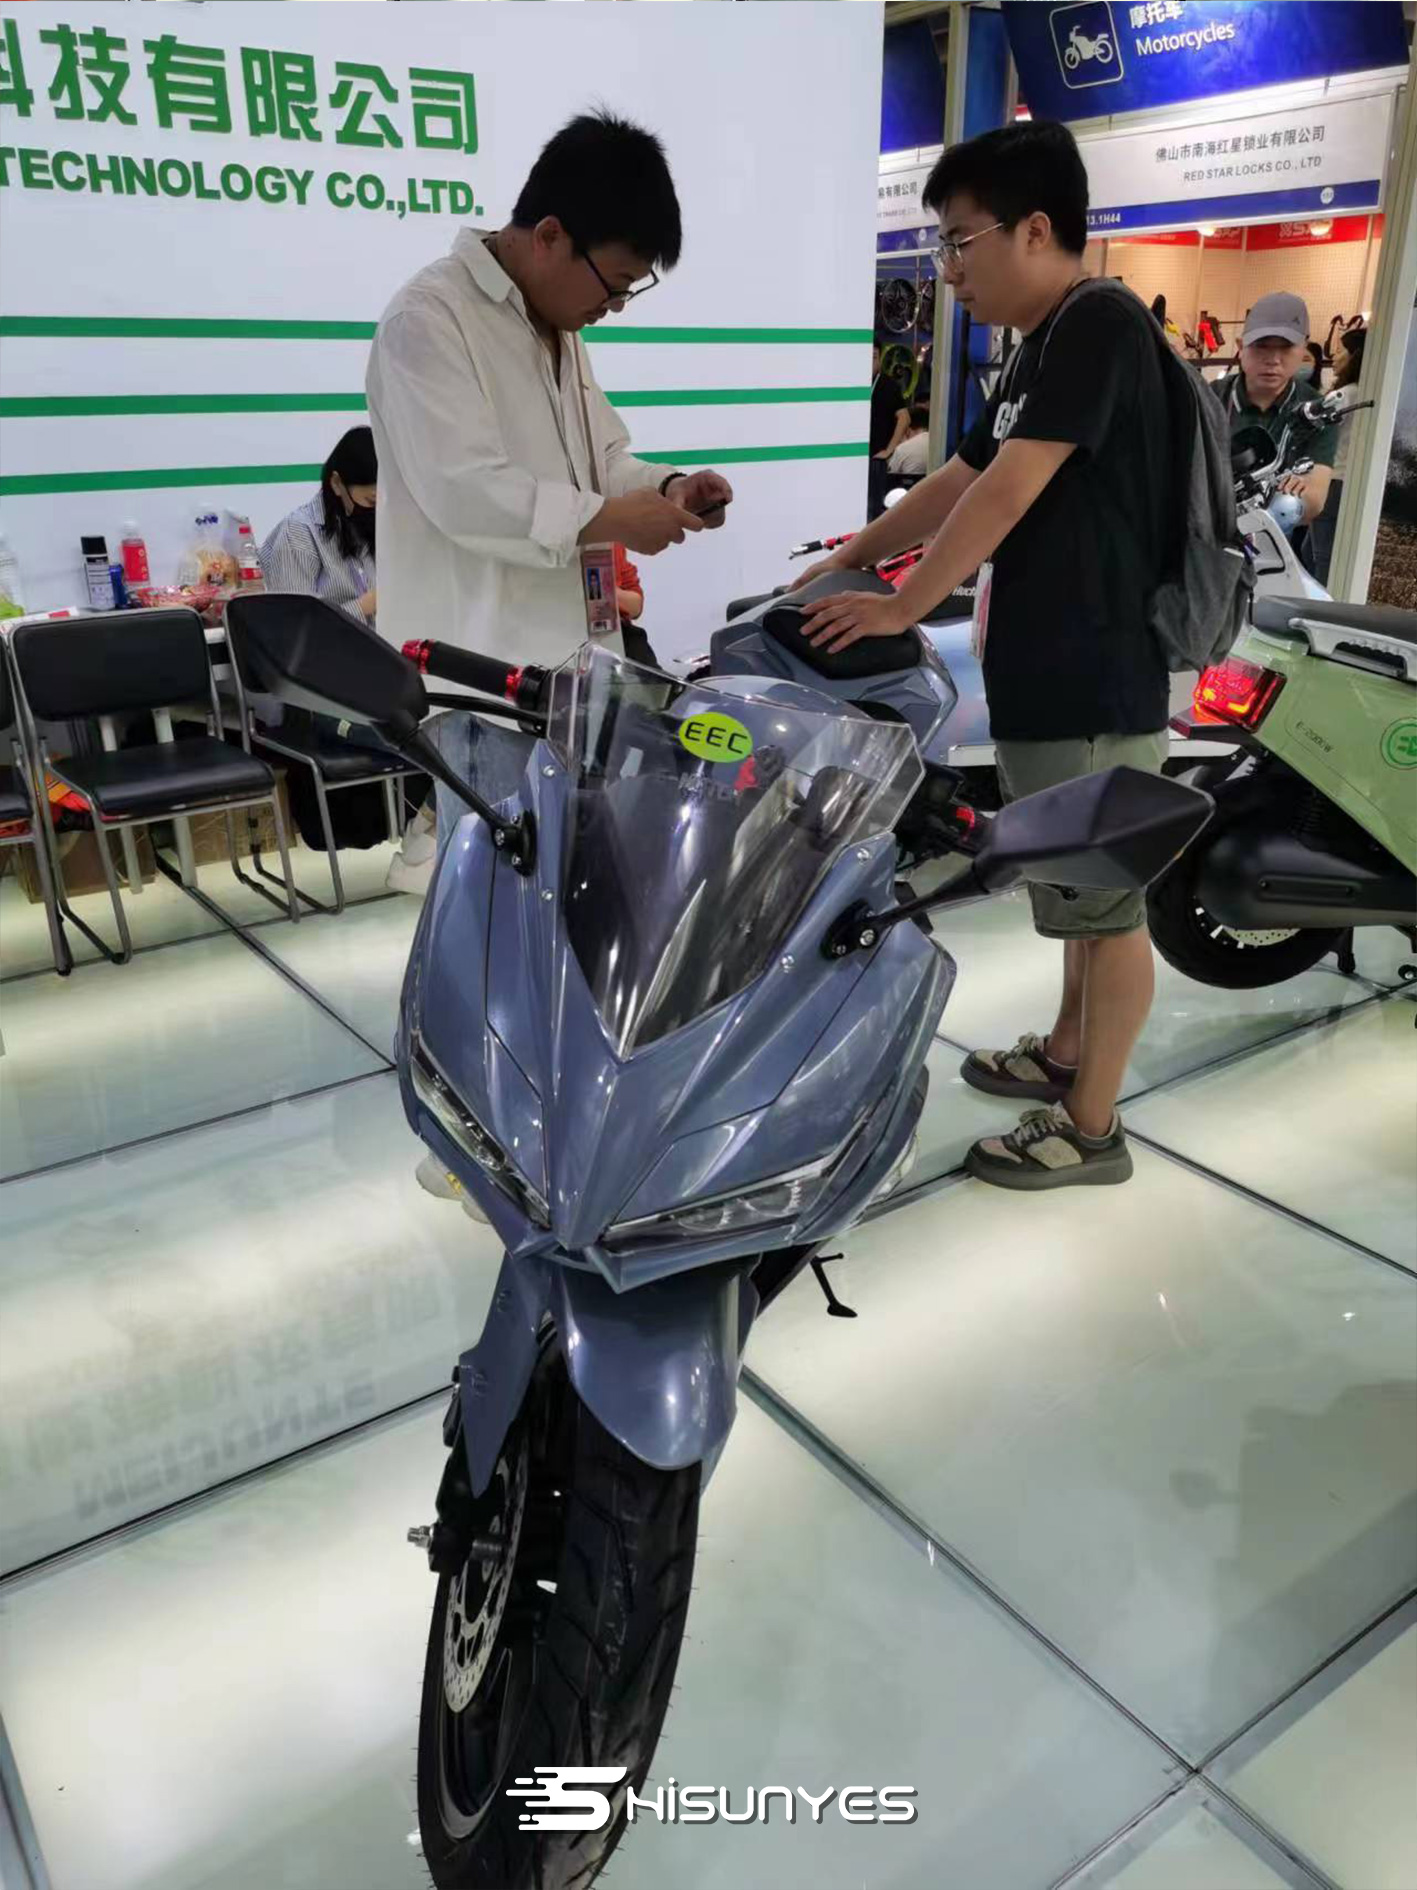 Our electric motorcycle V2 and electric scooters are popular at the #133rdCantonFairOnsite